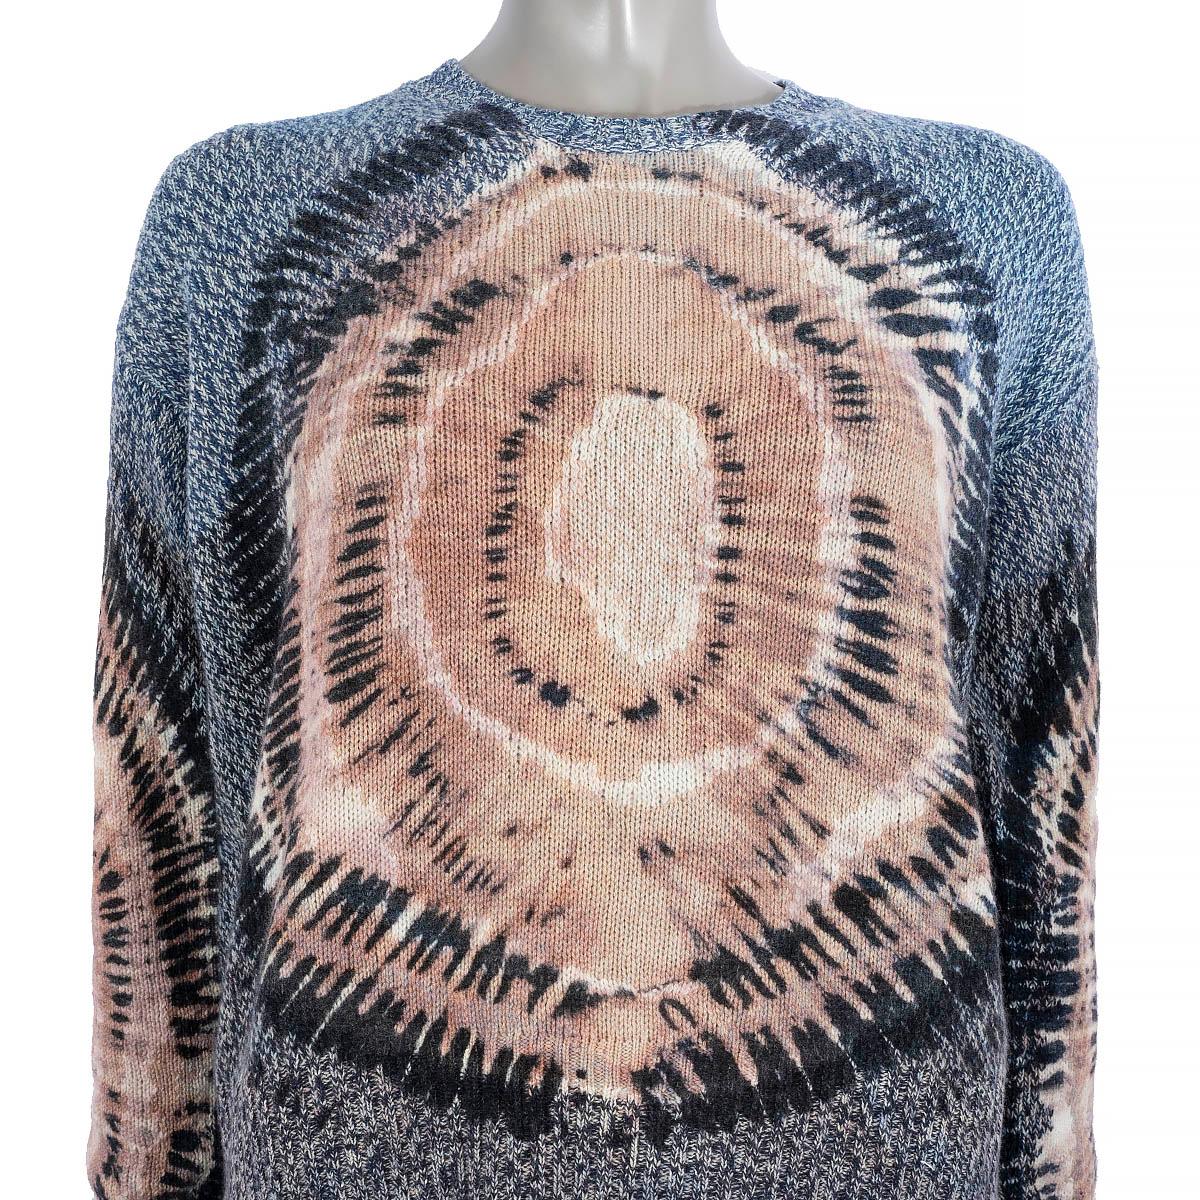 CHRISTIAN DIOR blue & nude cashmere 2021 TIE-DYE Sweater 34 XS 4